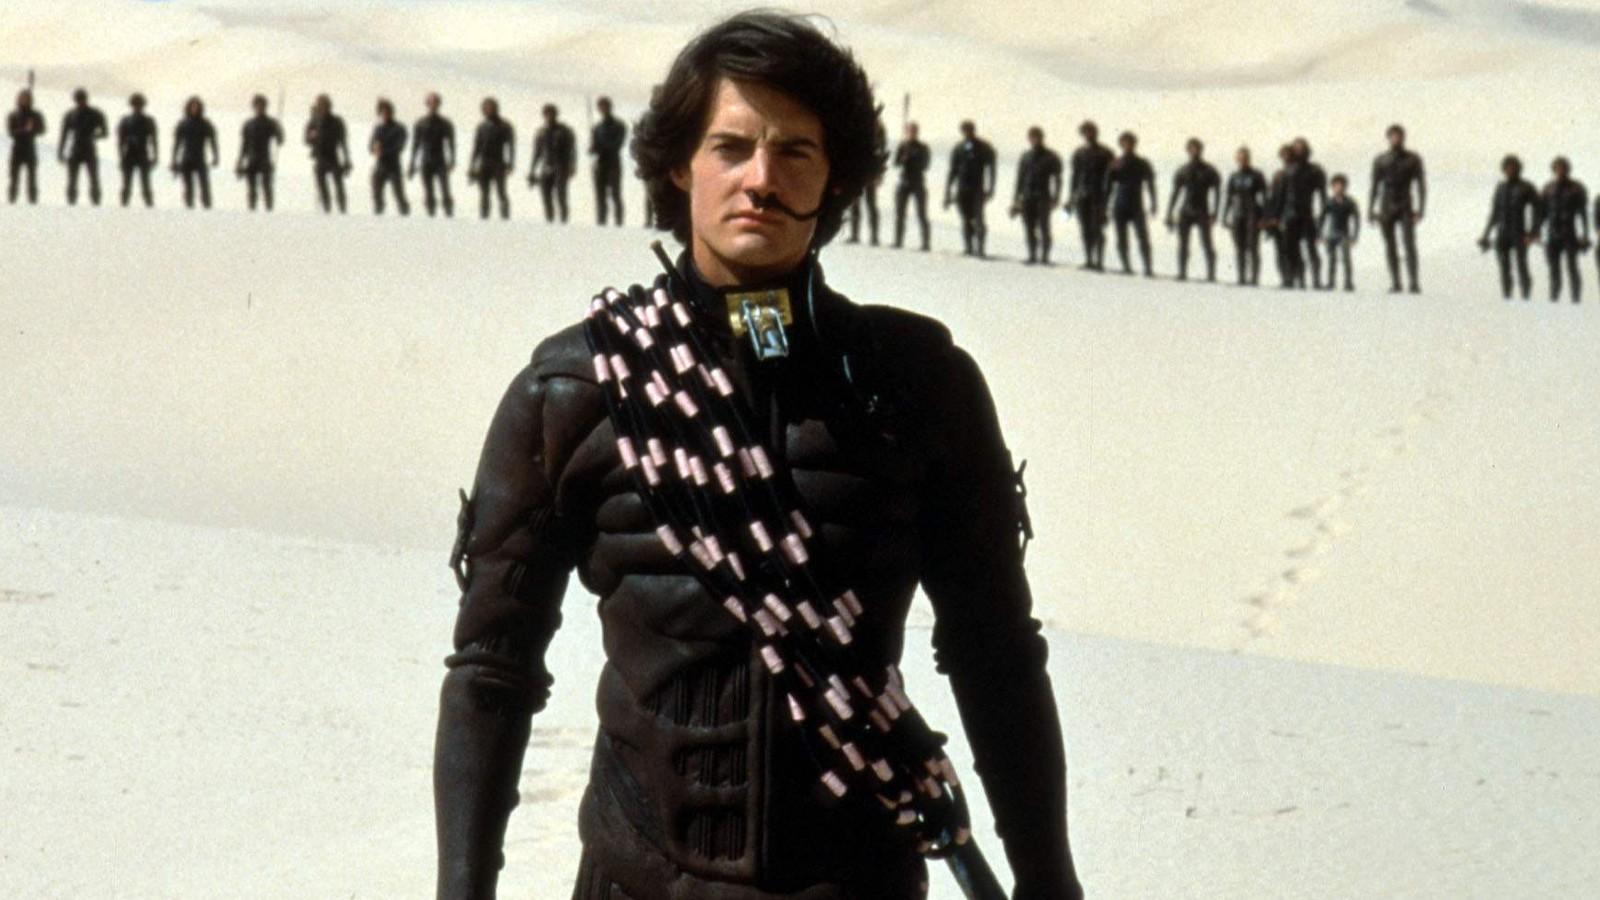 Kyle McLachlan standing in the sands of Dune.